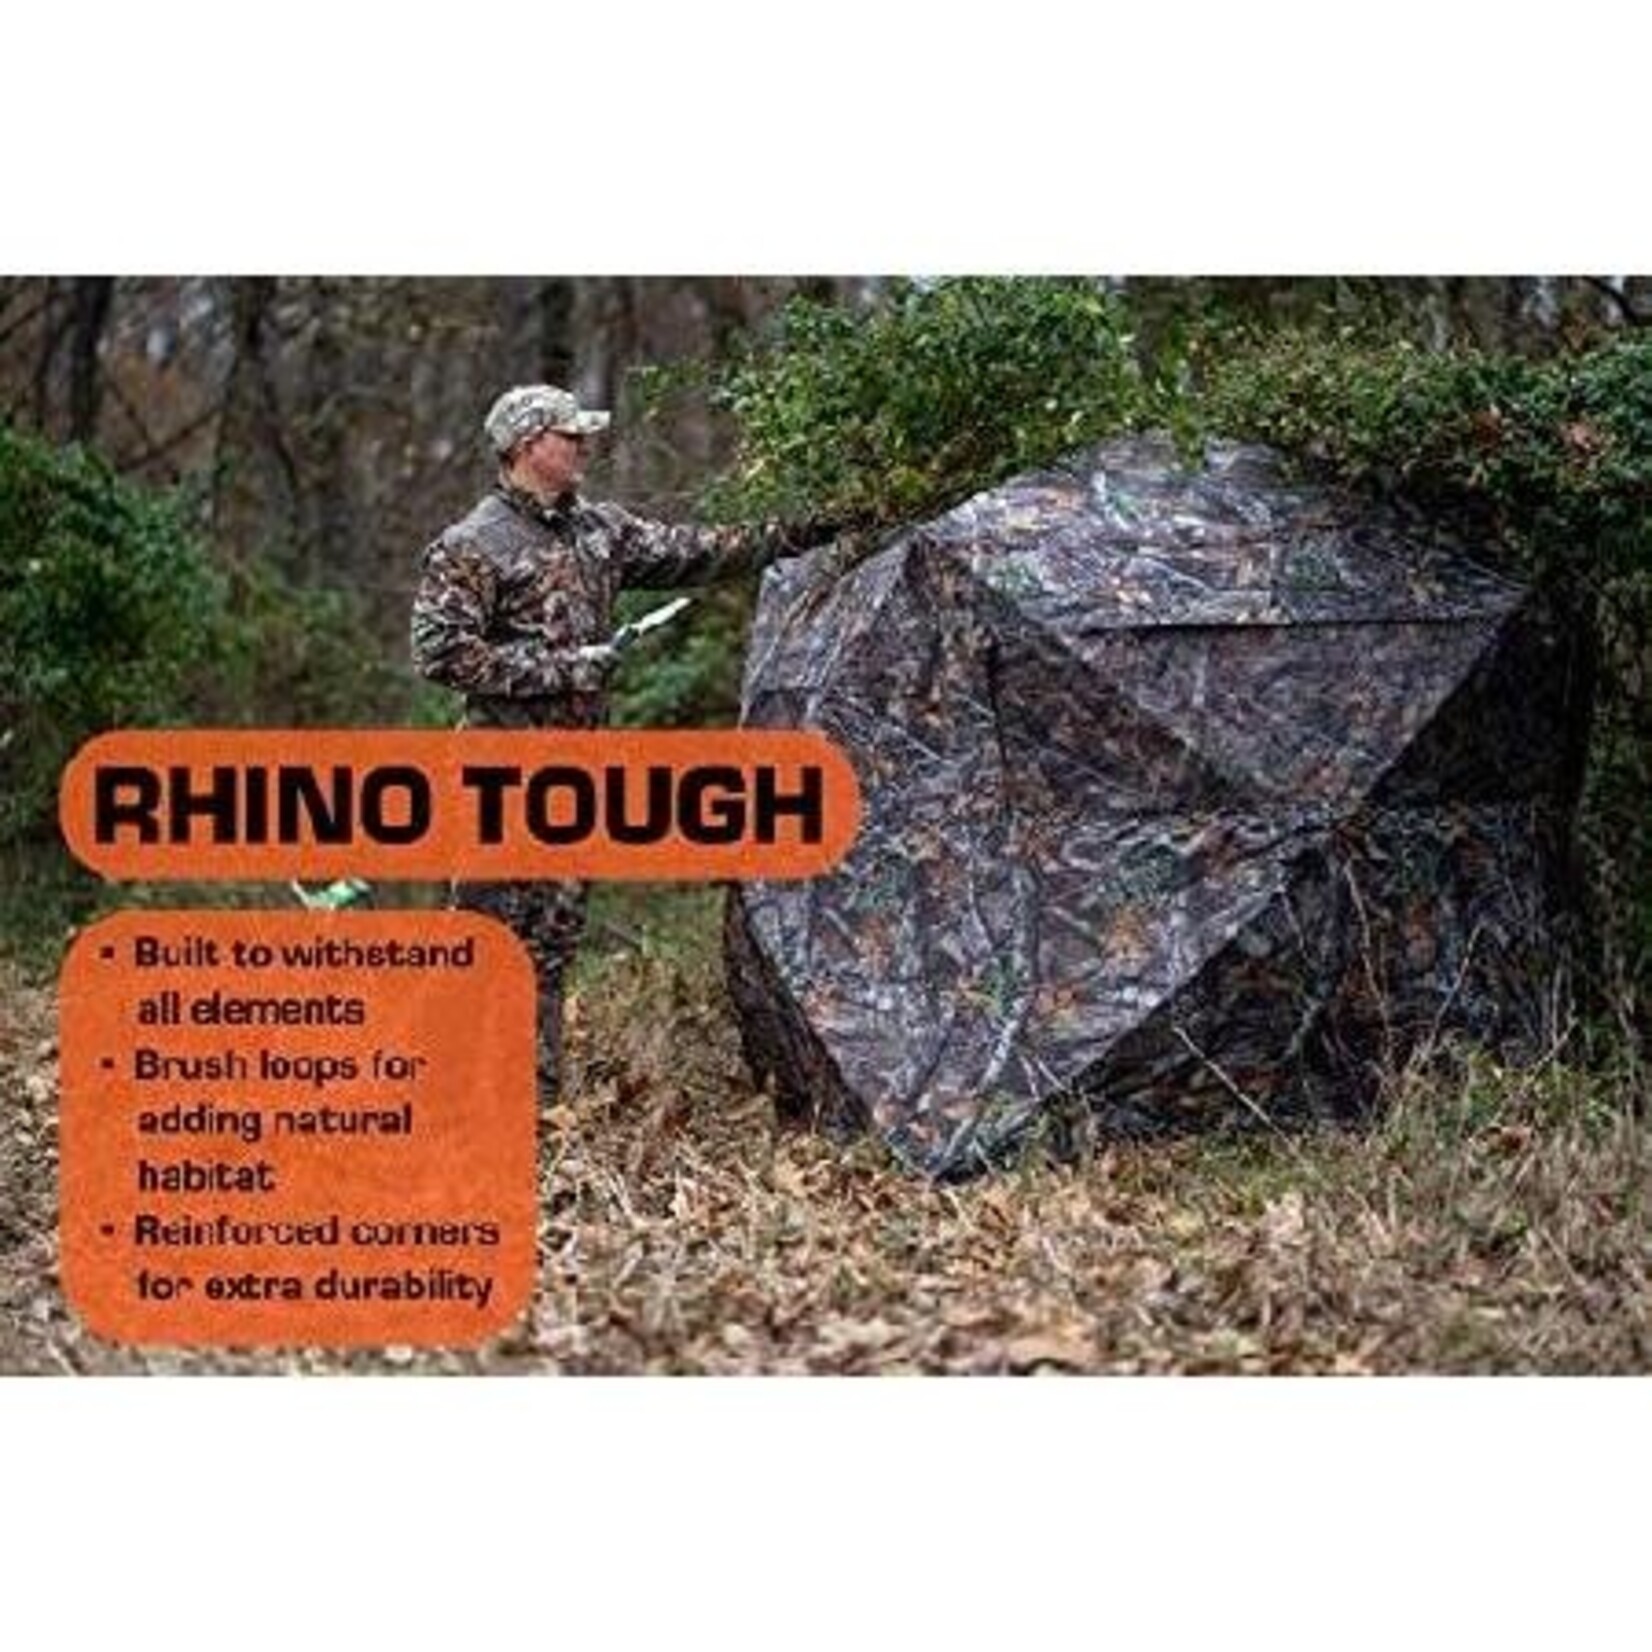 Rhino Blinds R100-RTE 2 Person Ground Blind Realtree Edge